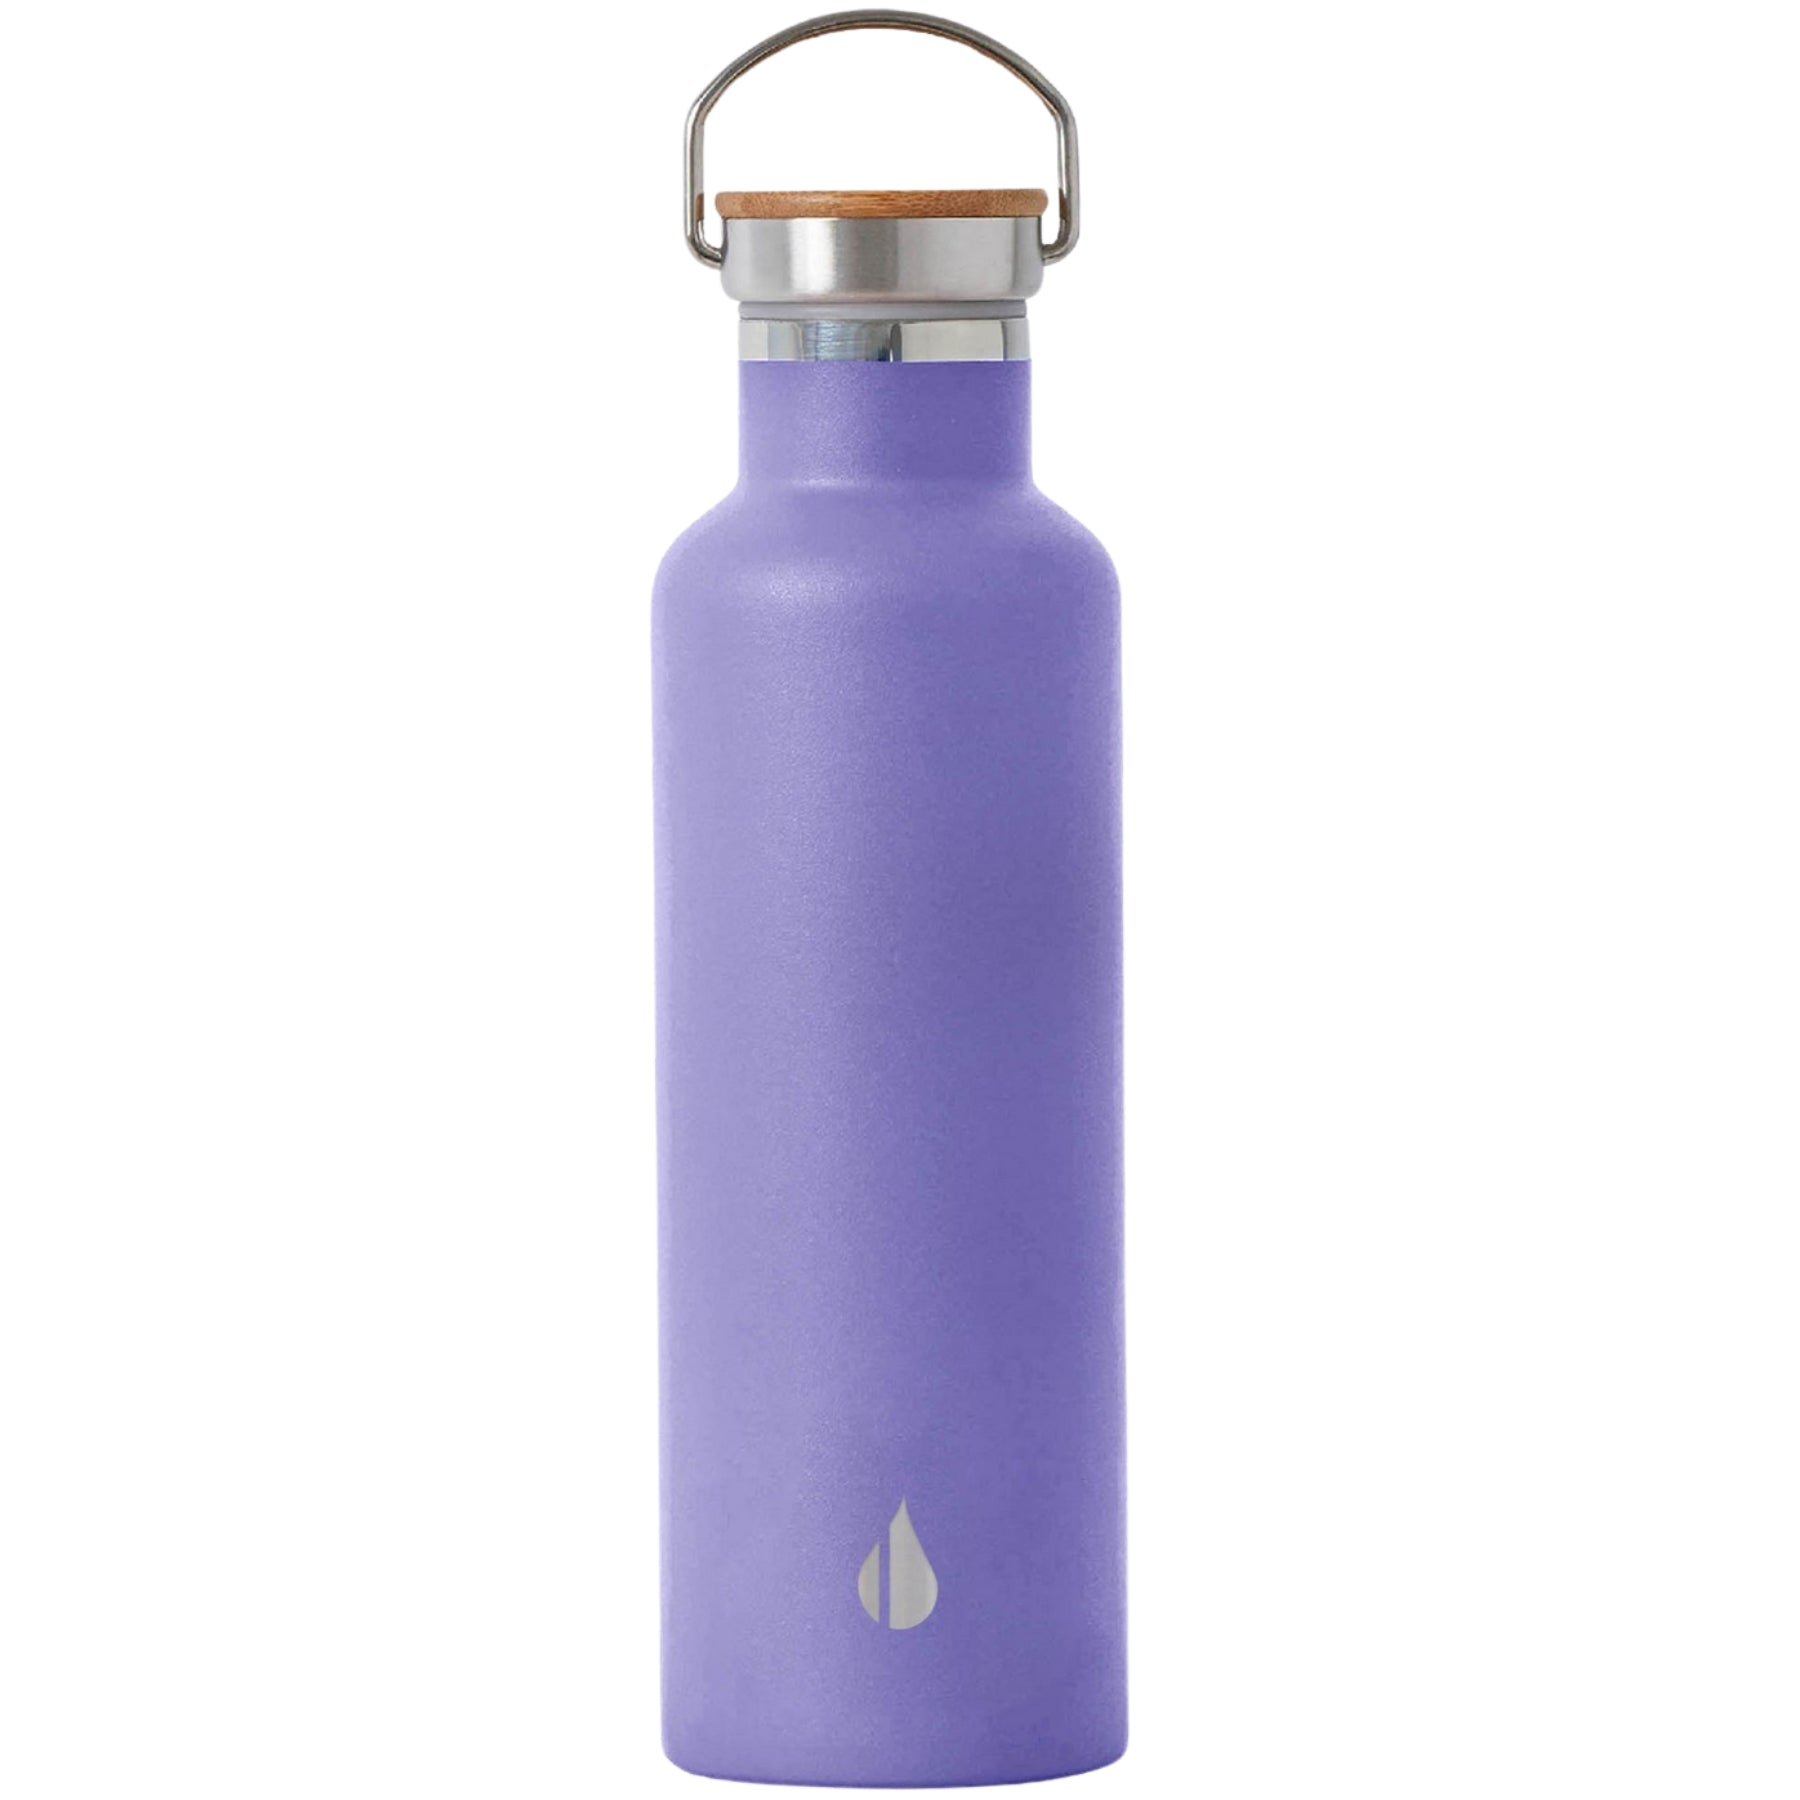 Customizable Elemental® 25 oz Stainless Steel Insulated Bottle in lavender